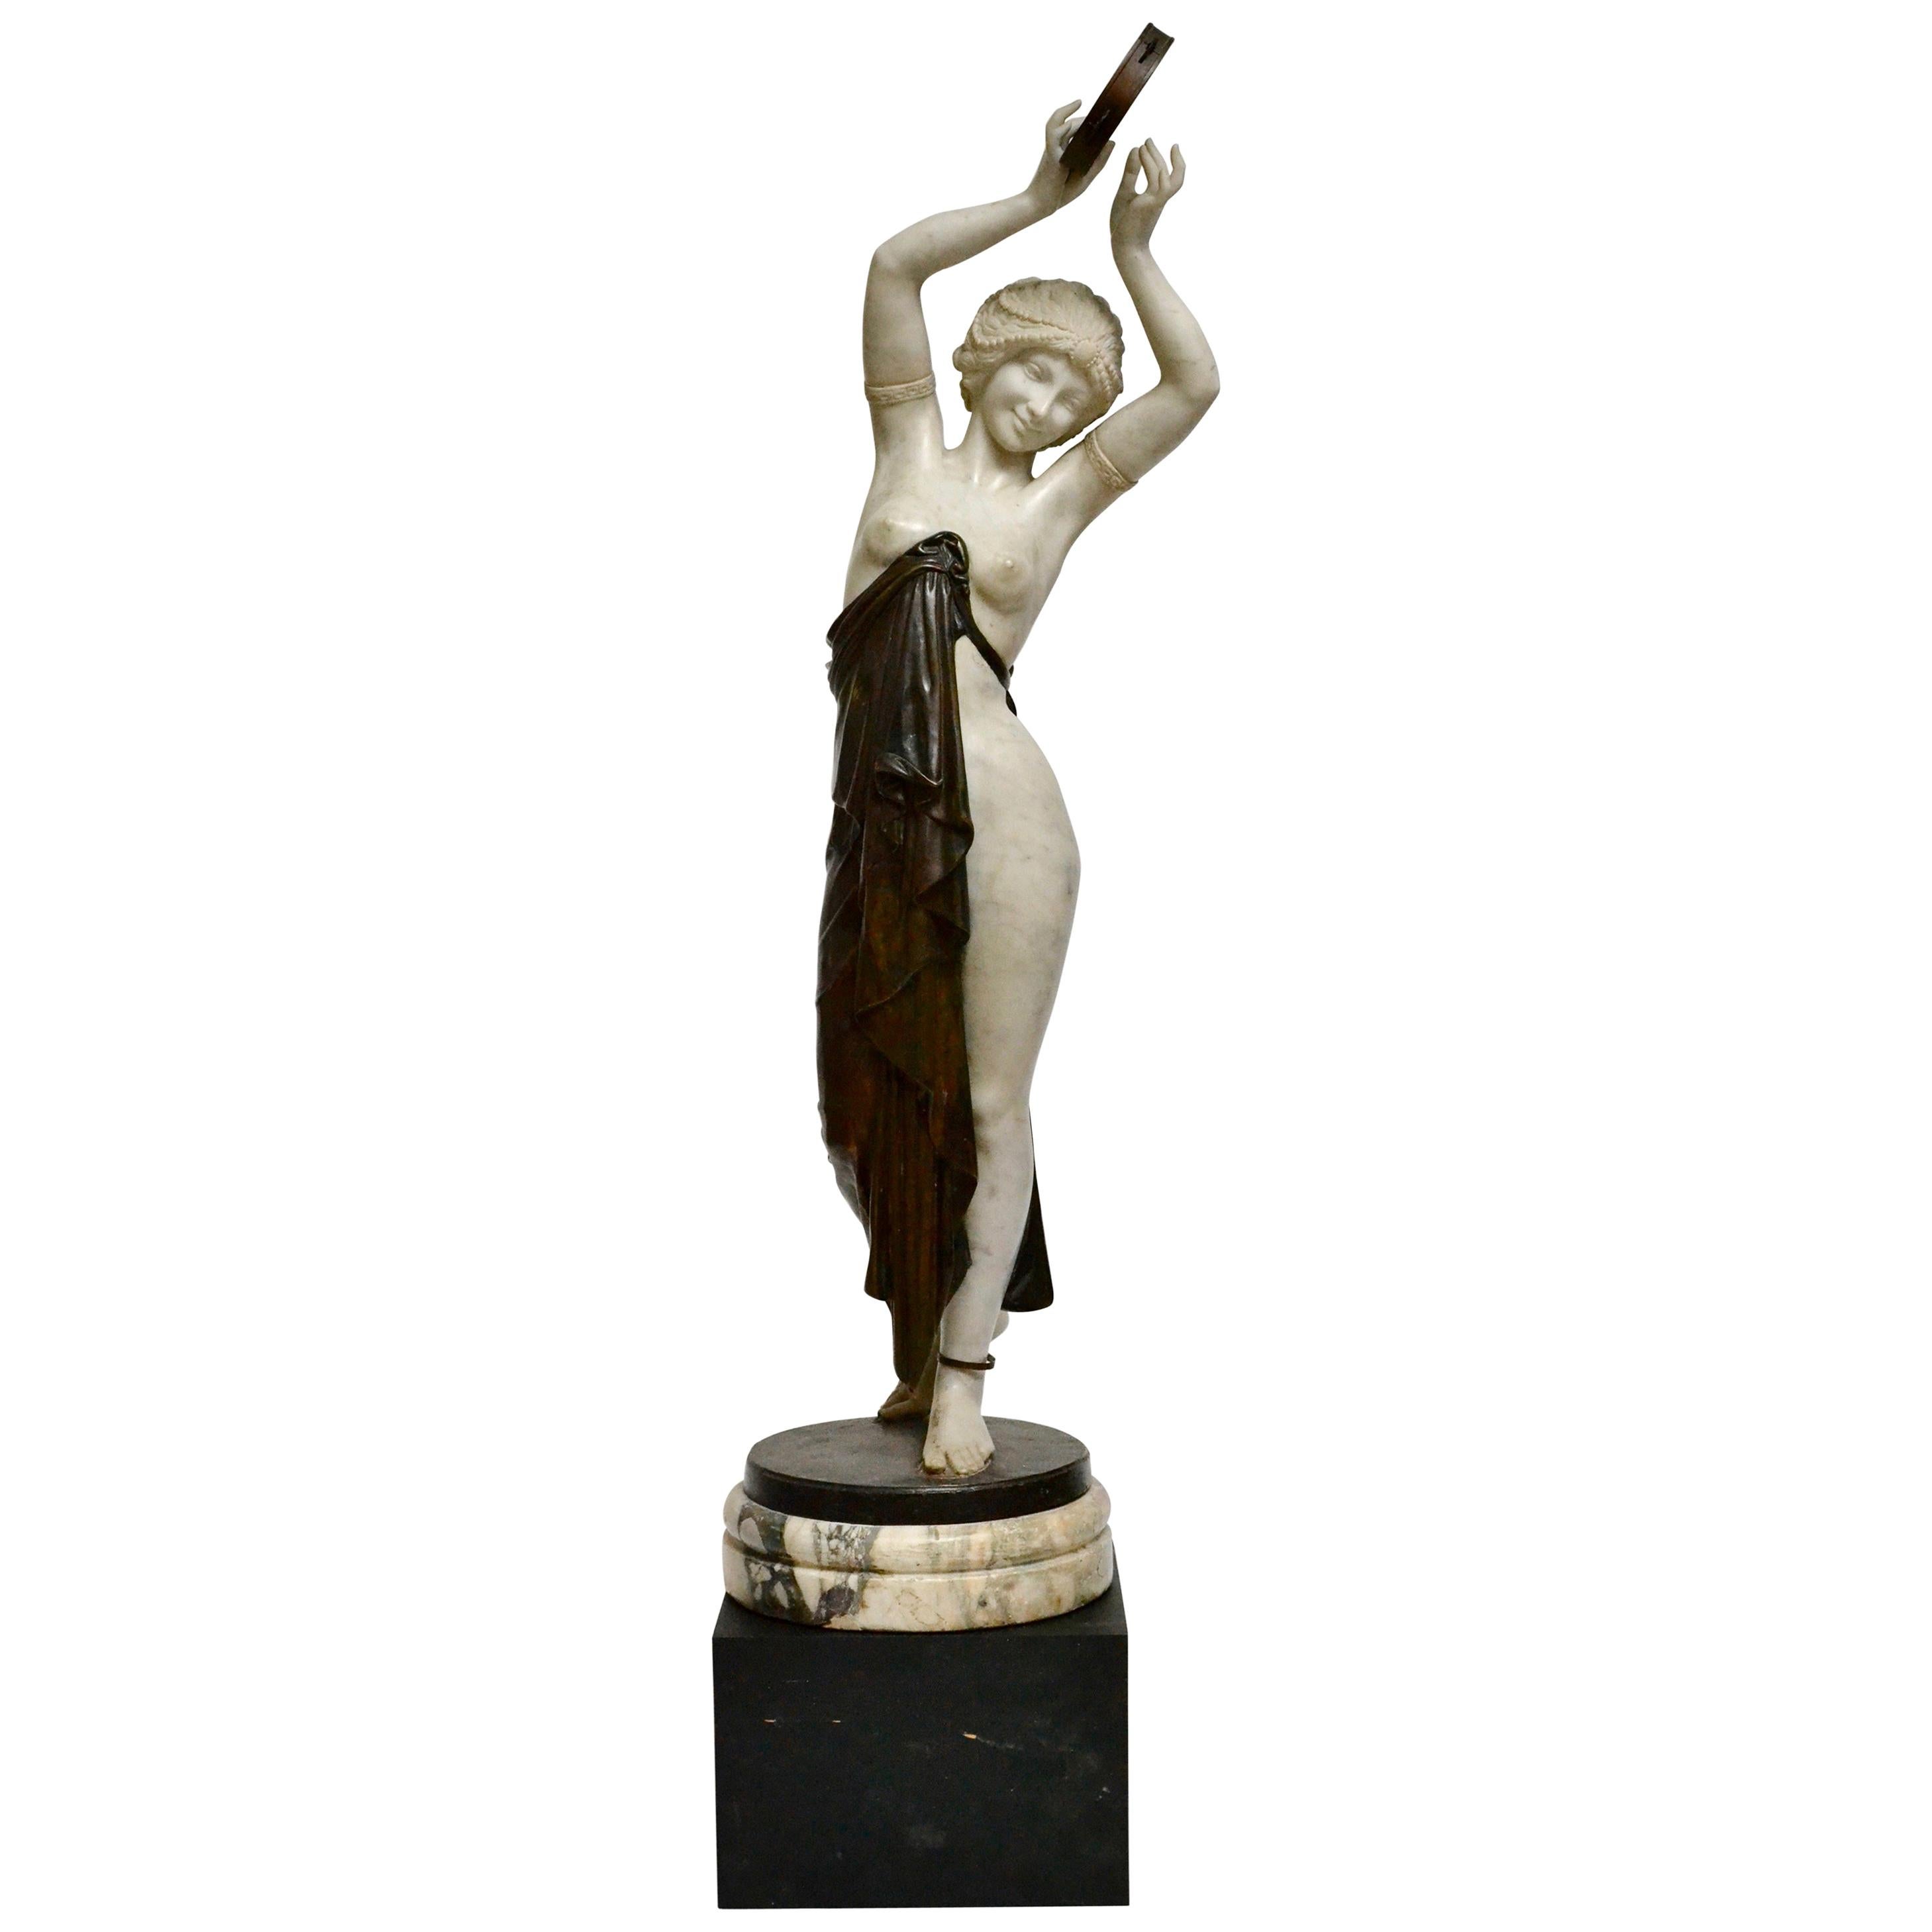 Marble and Bronze Sculpture of a Dancing Woman Holding a Tambourine